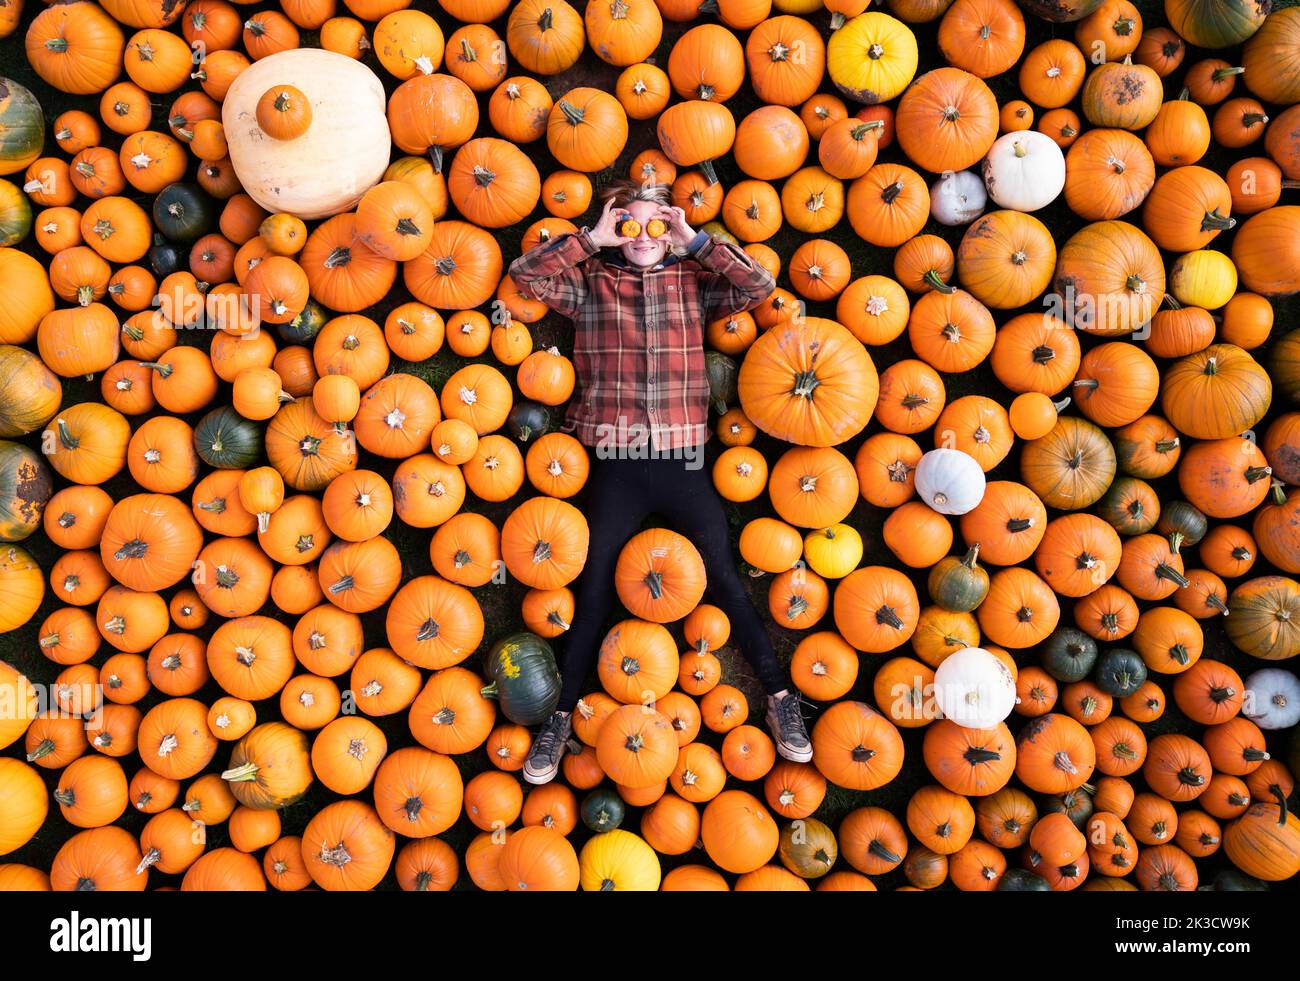 Sandra Mlynarova with some of the 100,000 pumkins that have been harvested ahead of the Spilmans Pumpkin Festival, that opens this Saturday at Tom Spilmans' Pumpkin Farm in Thirsk. Picture date: Monday September 26, 2022. Planted in May, the farm has grown 20 varieties of pumpkins over 25 acres of land, for the pumpkin picking season ahead of Halloween. Stock Photo